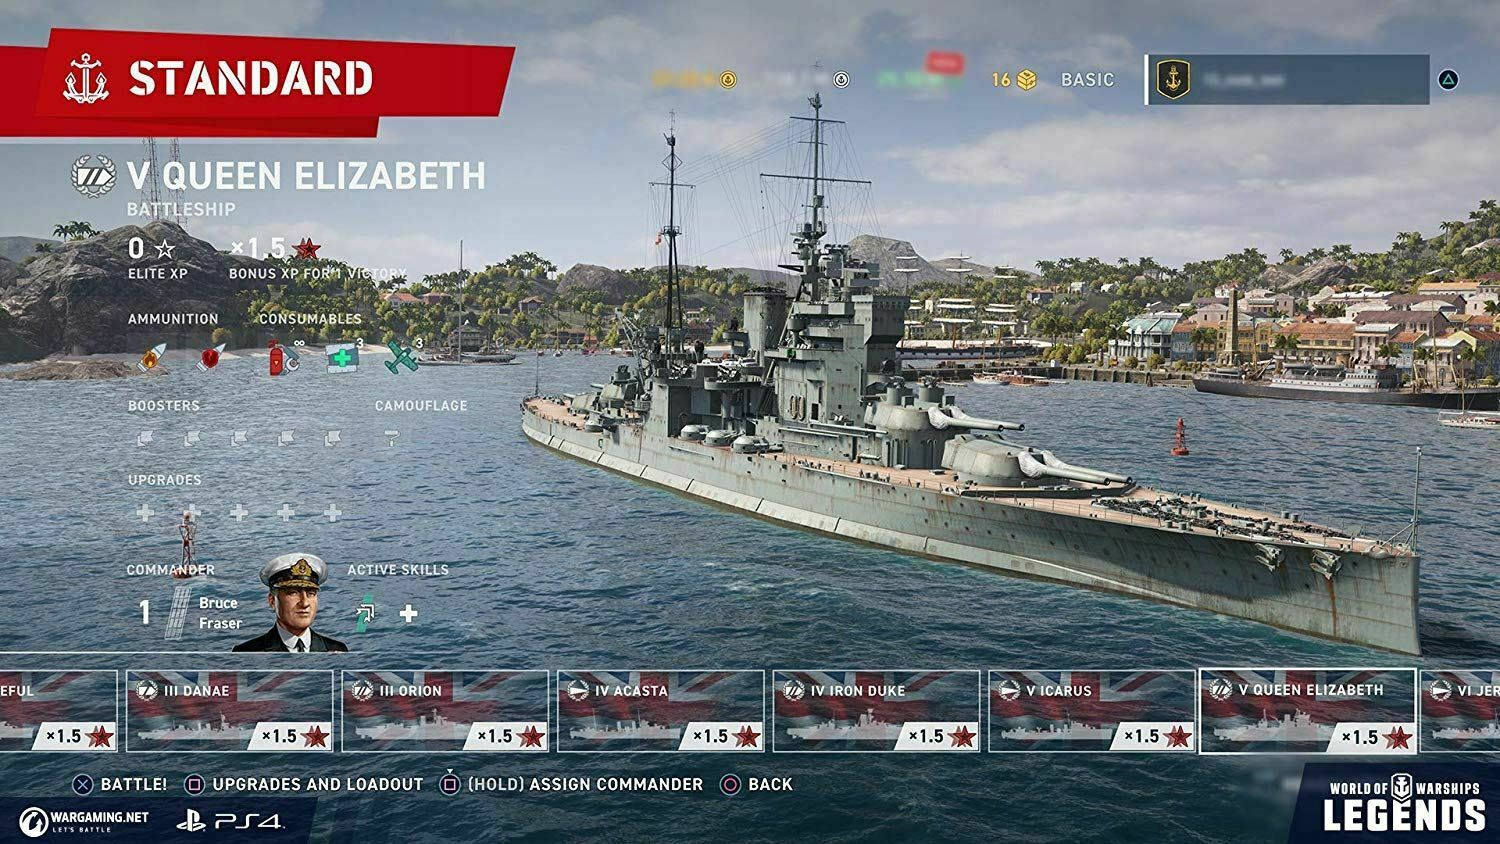 world of warships: legends update ps4